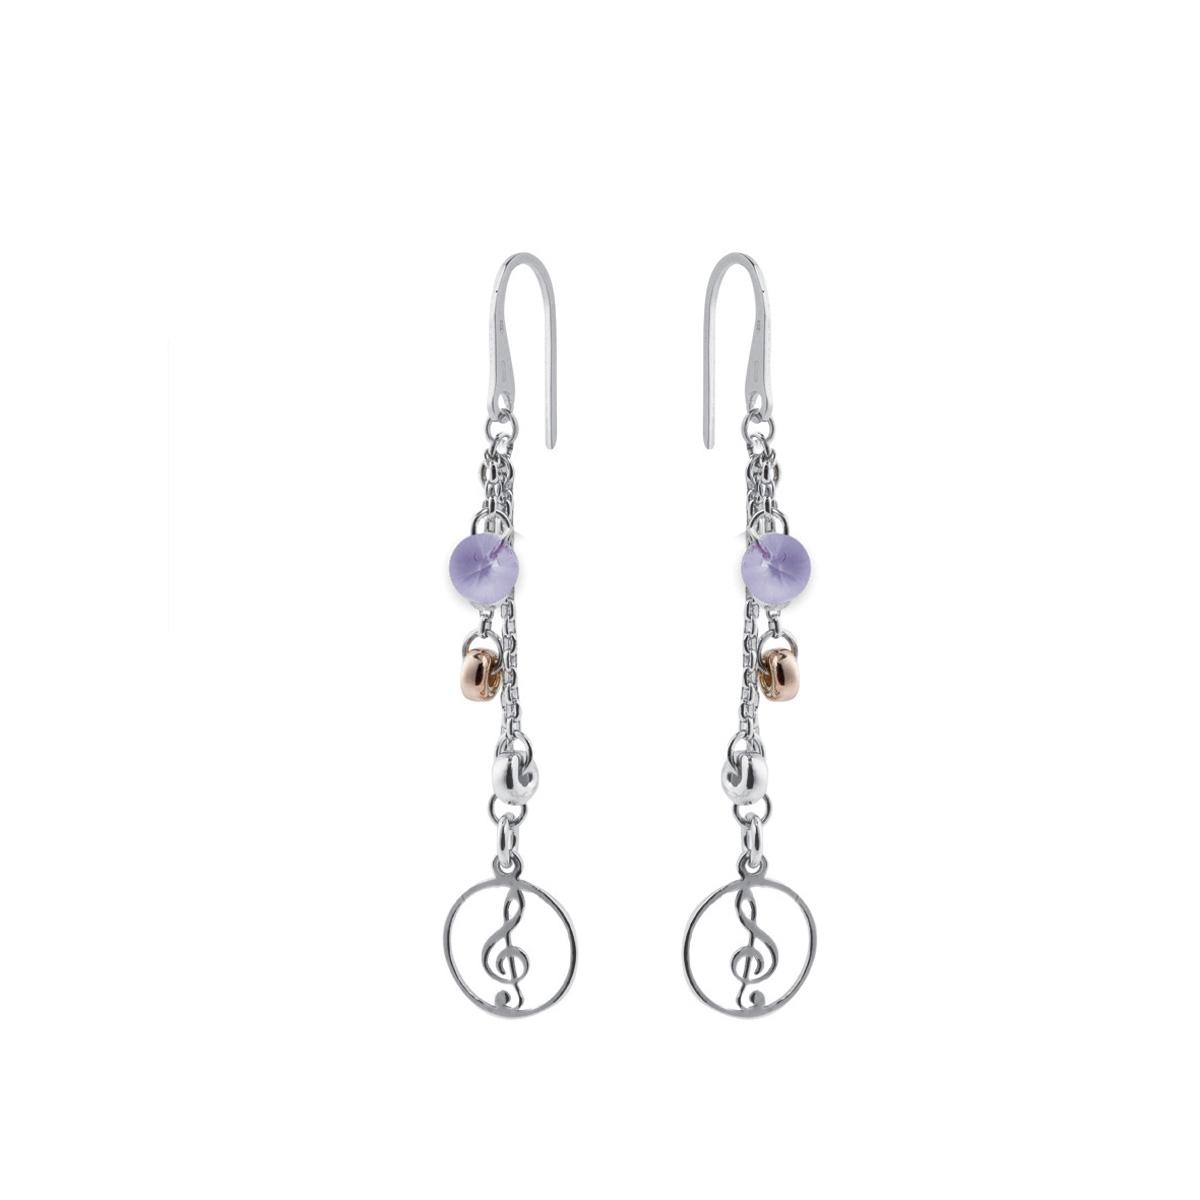 Earrings in rhodium-plated and rose-gold plated 925 silver, and Swarovski ™ - ZOR733-LH